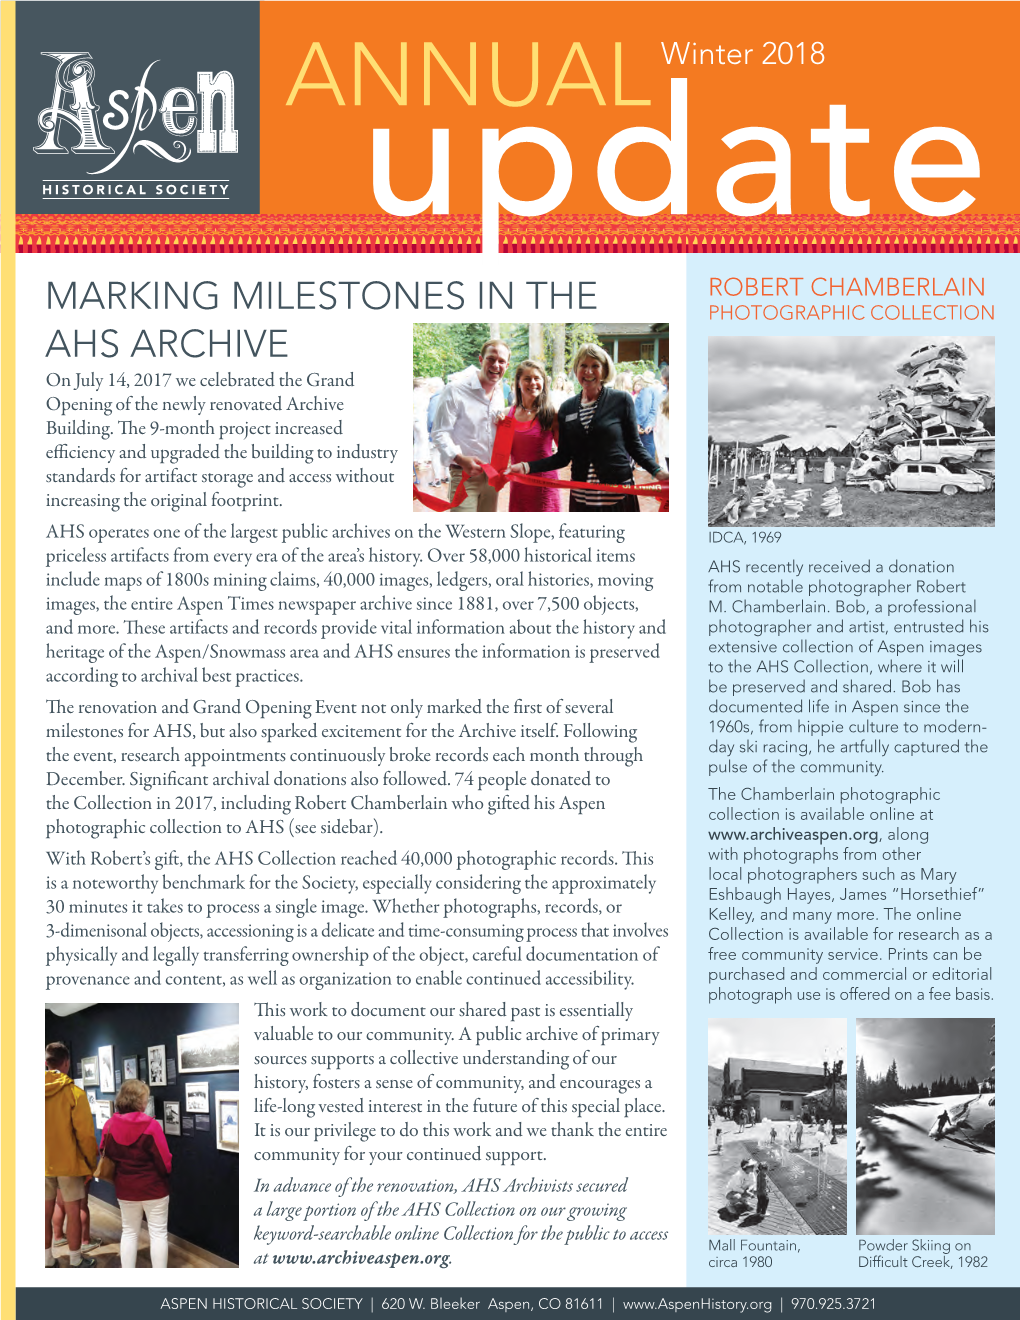 Marking Milestones in the Ahs Archive